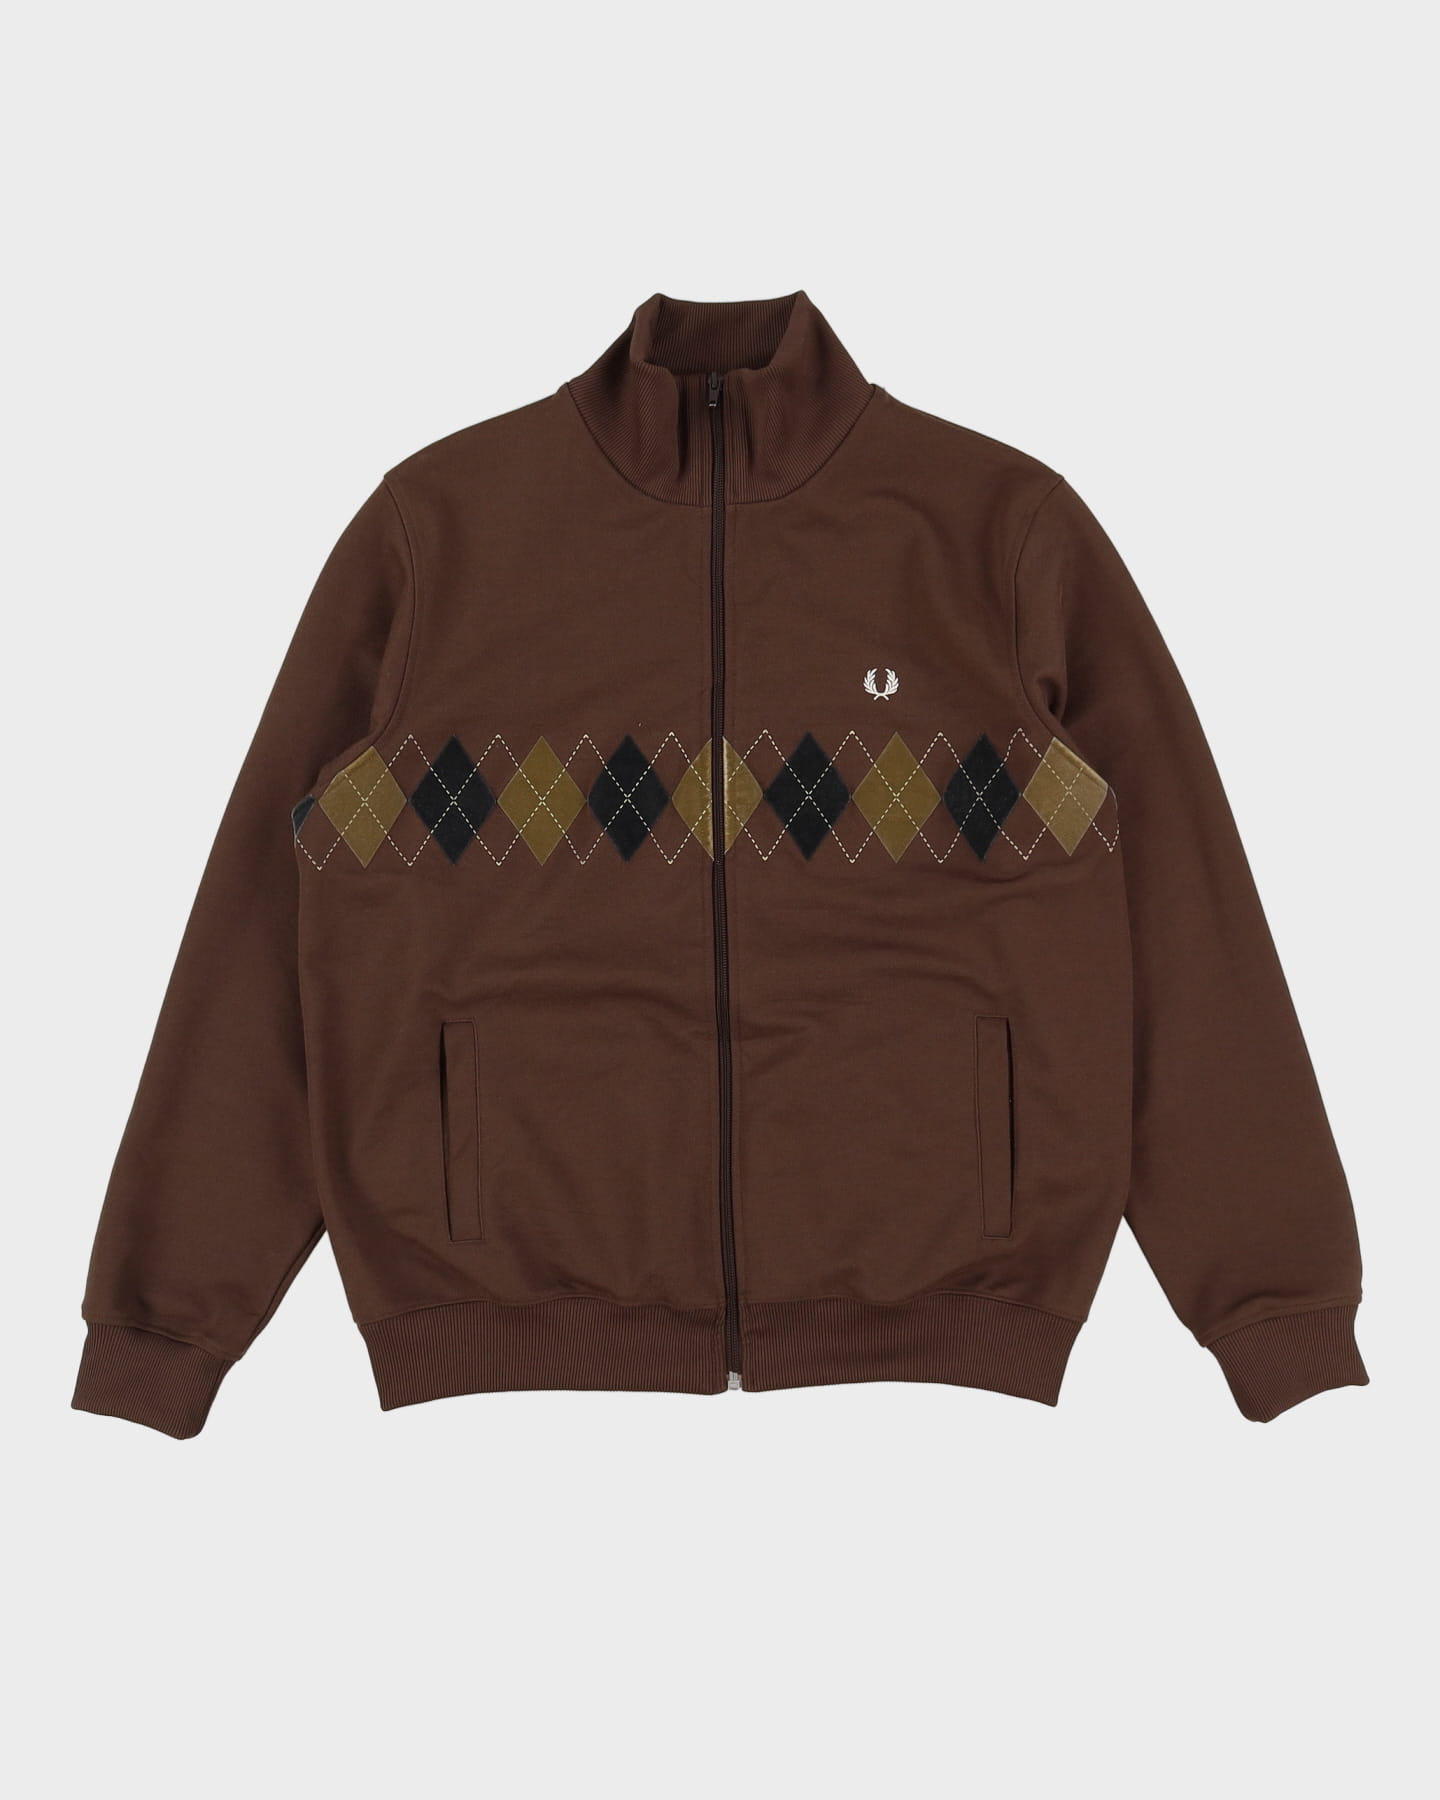 00s Fred Perry Brown Patterned Track Jacket - L